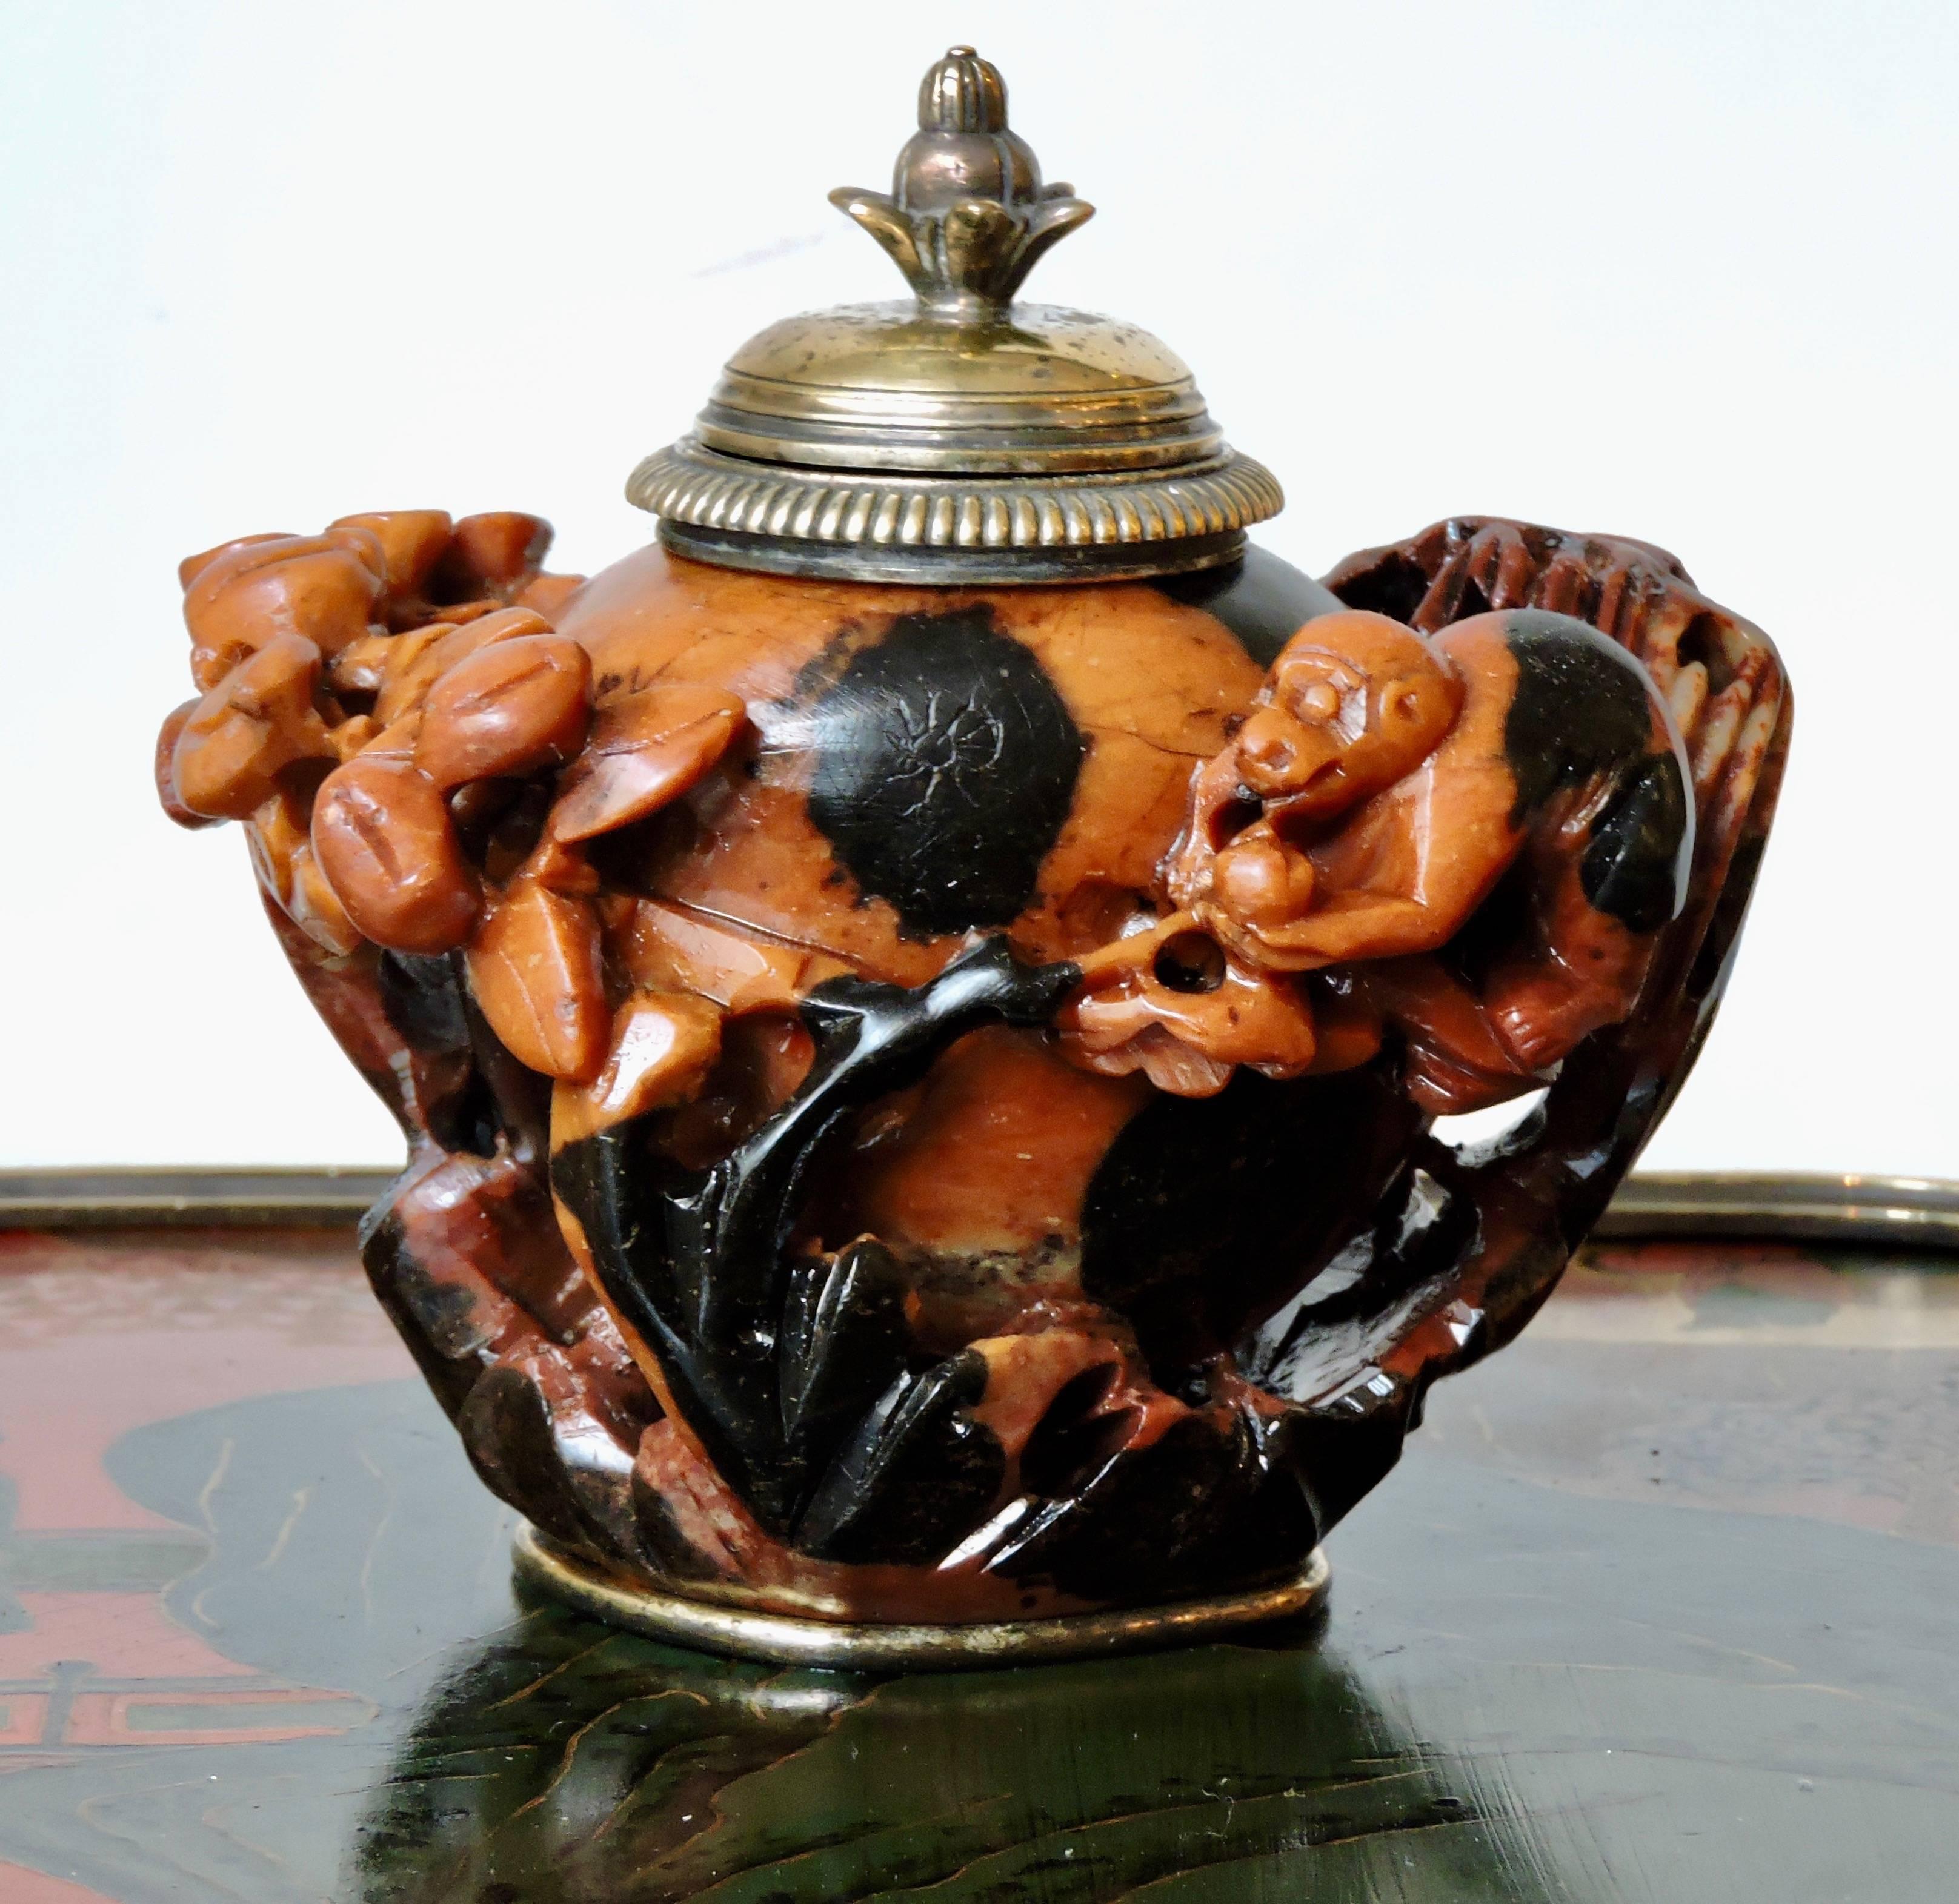 Late 19th Century Boin-Taburet Paris Soapstone Inkwell, Ormolu and Chinese Lacquer, circa 1880